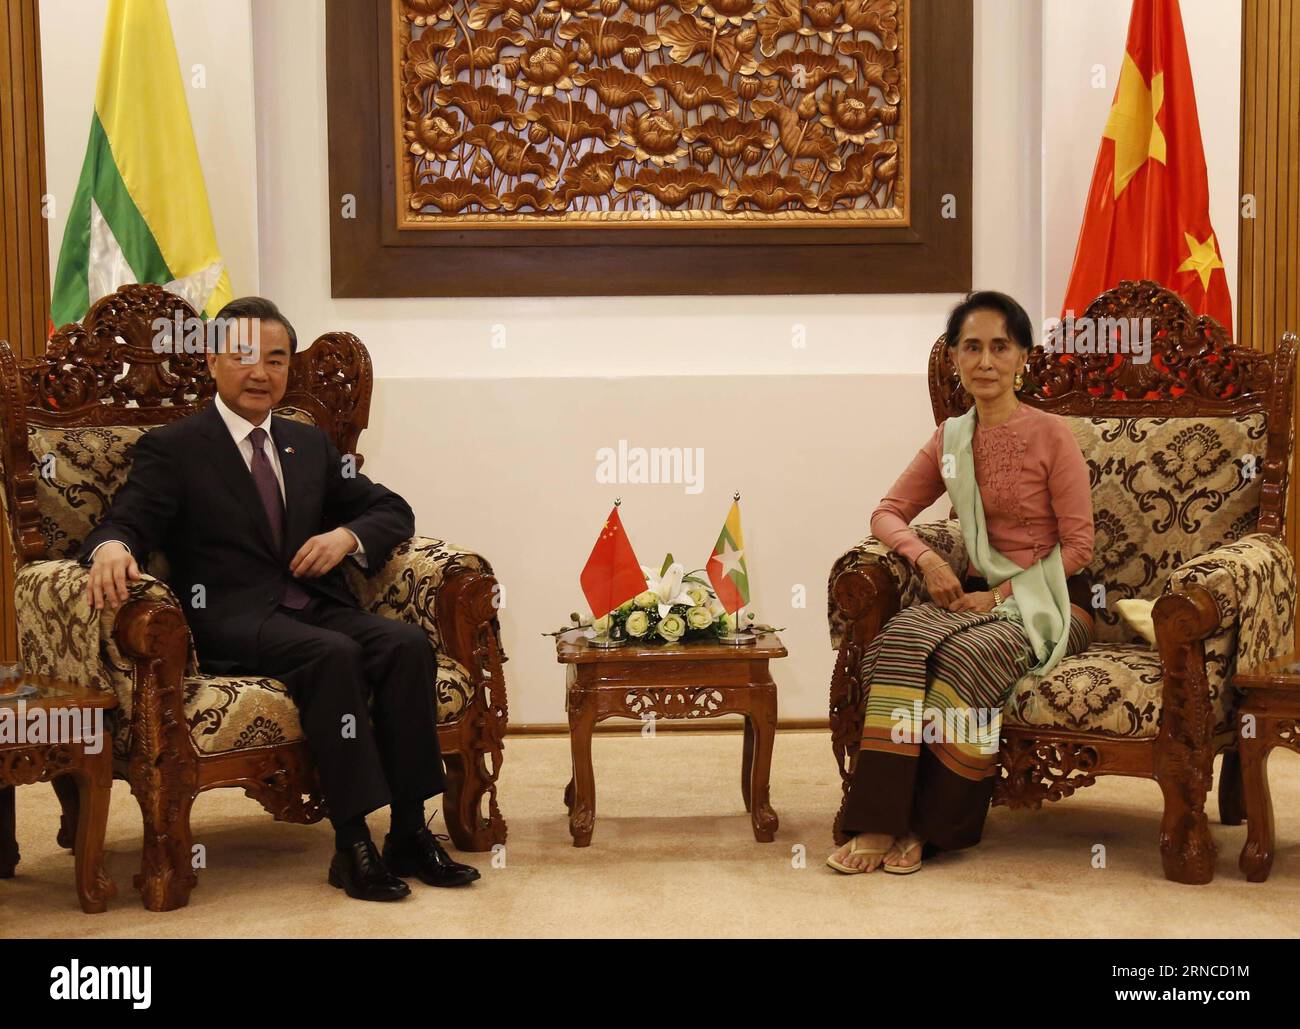 (160405) -- NAY PYI TAW, April 5, 2016 -- Myanmar s Foreign Minister Aung San Suu Kyi (R) meets with her Chinese counterpart Wang Yi in Nay Pyi Taw, Myanmar, April 5, 2016. Chinese Foreign Minister Wang Yi arrived here Tuesday on his first visit to Myanmar days after Myanmar s new government took office on March 30. U Aung) MYANMAR-NAY PYI TAW-CHINA-MEETING yangon PUBLICATIONxNOTxINxCHN   Nay Pyi Taw April 5 2016 Myanmar S Foreign Ministers Aung San Suu Kyi r Meets With her Chinese Part Wang Yi in Nay Pyi Taw Myanmar April 5 2016 Chinese Foreign Ministers Wang Yi arrived Here Tuesday ON His Fi Stock Photo